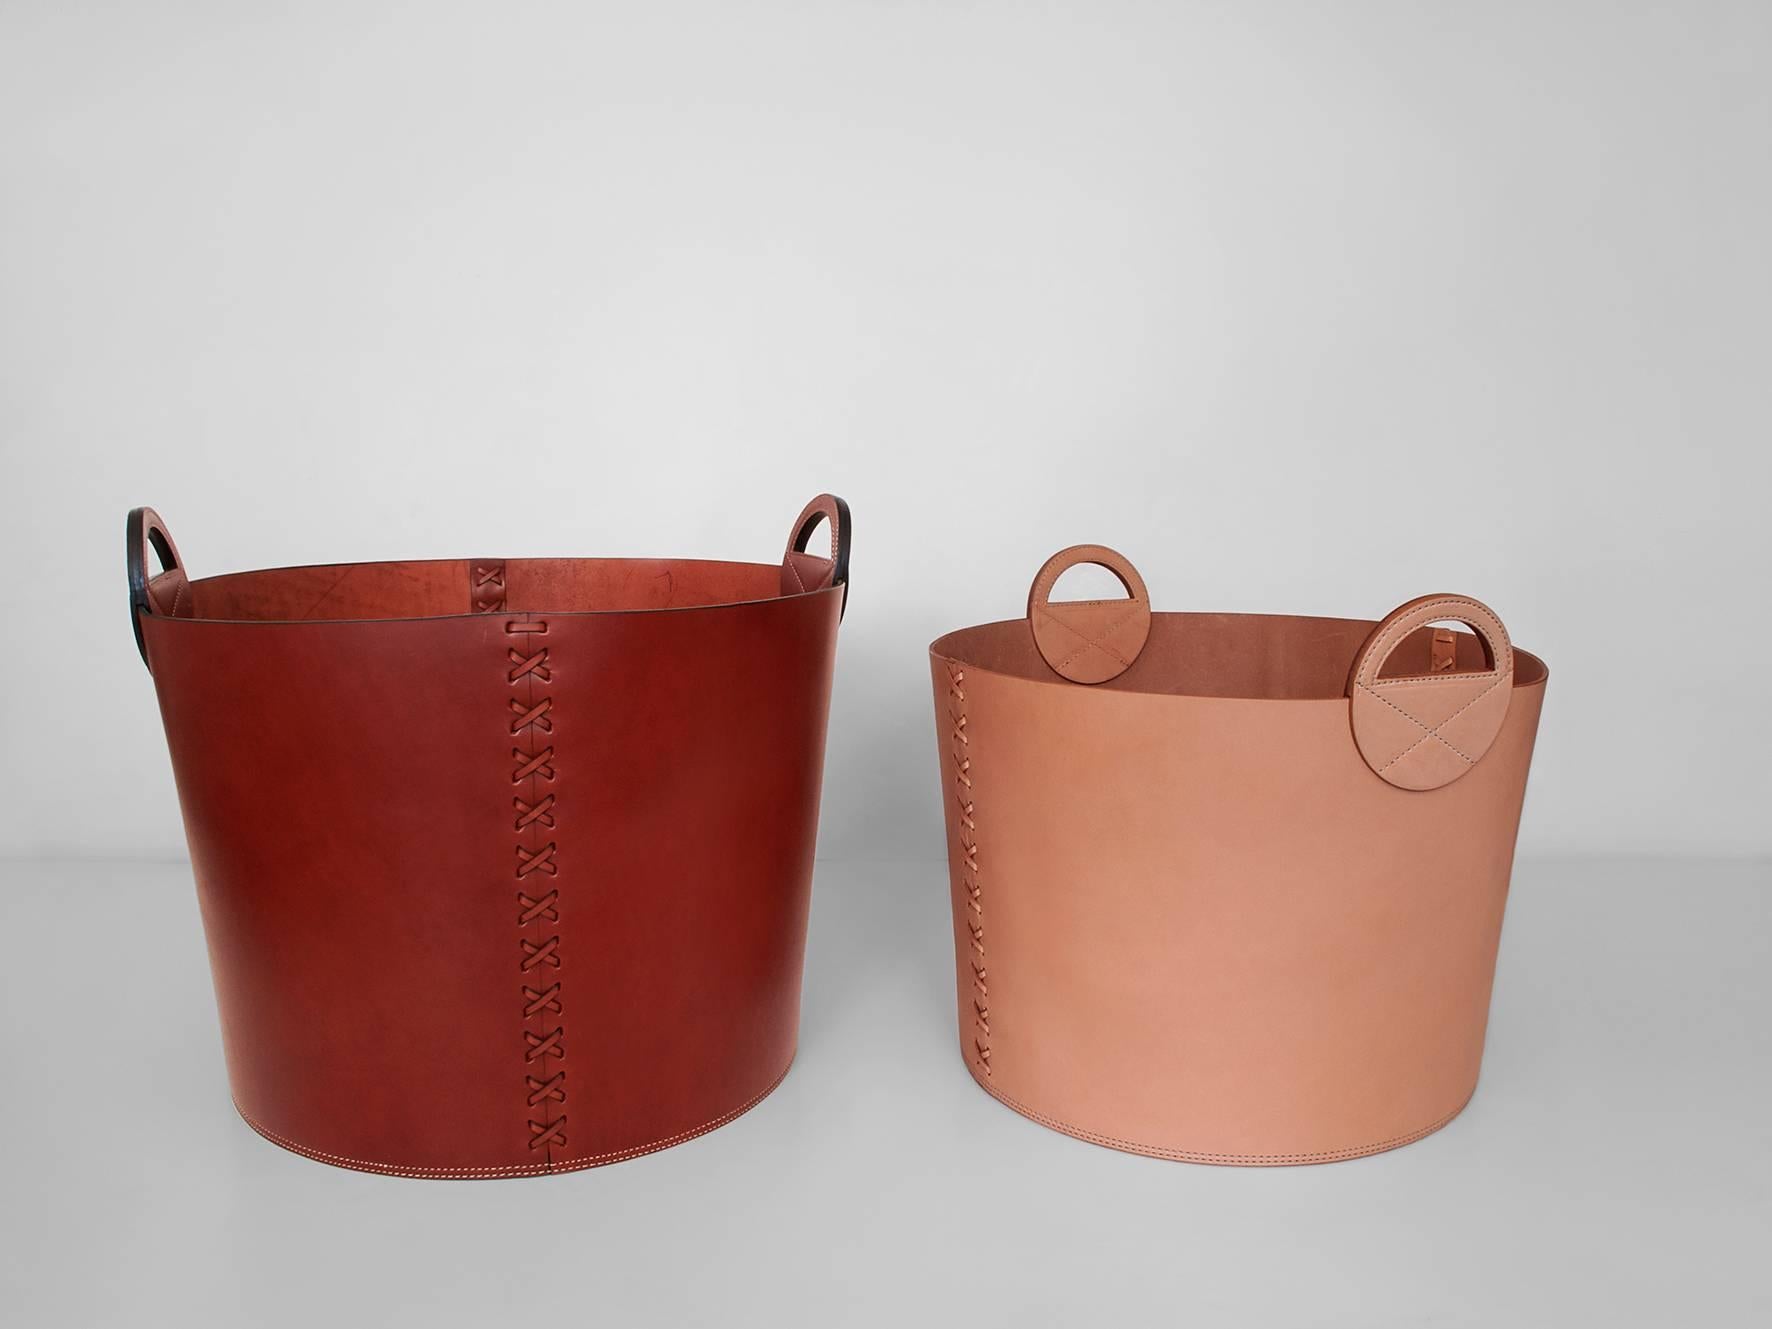 The leather bushel basket is inspired by old New England orchard baskets. It is constructed of 14-oz. vegetable-tanned saddle leather sourced from the finest American steerhides. It features a drop-in wood bottom in either white oak (perfect for